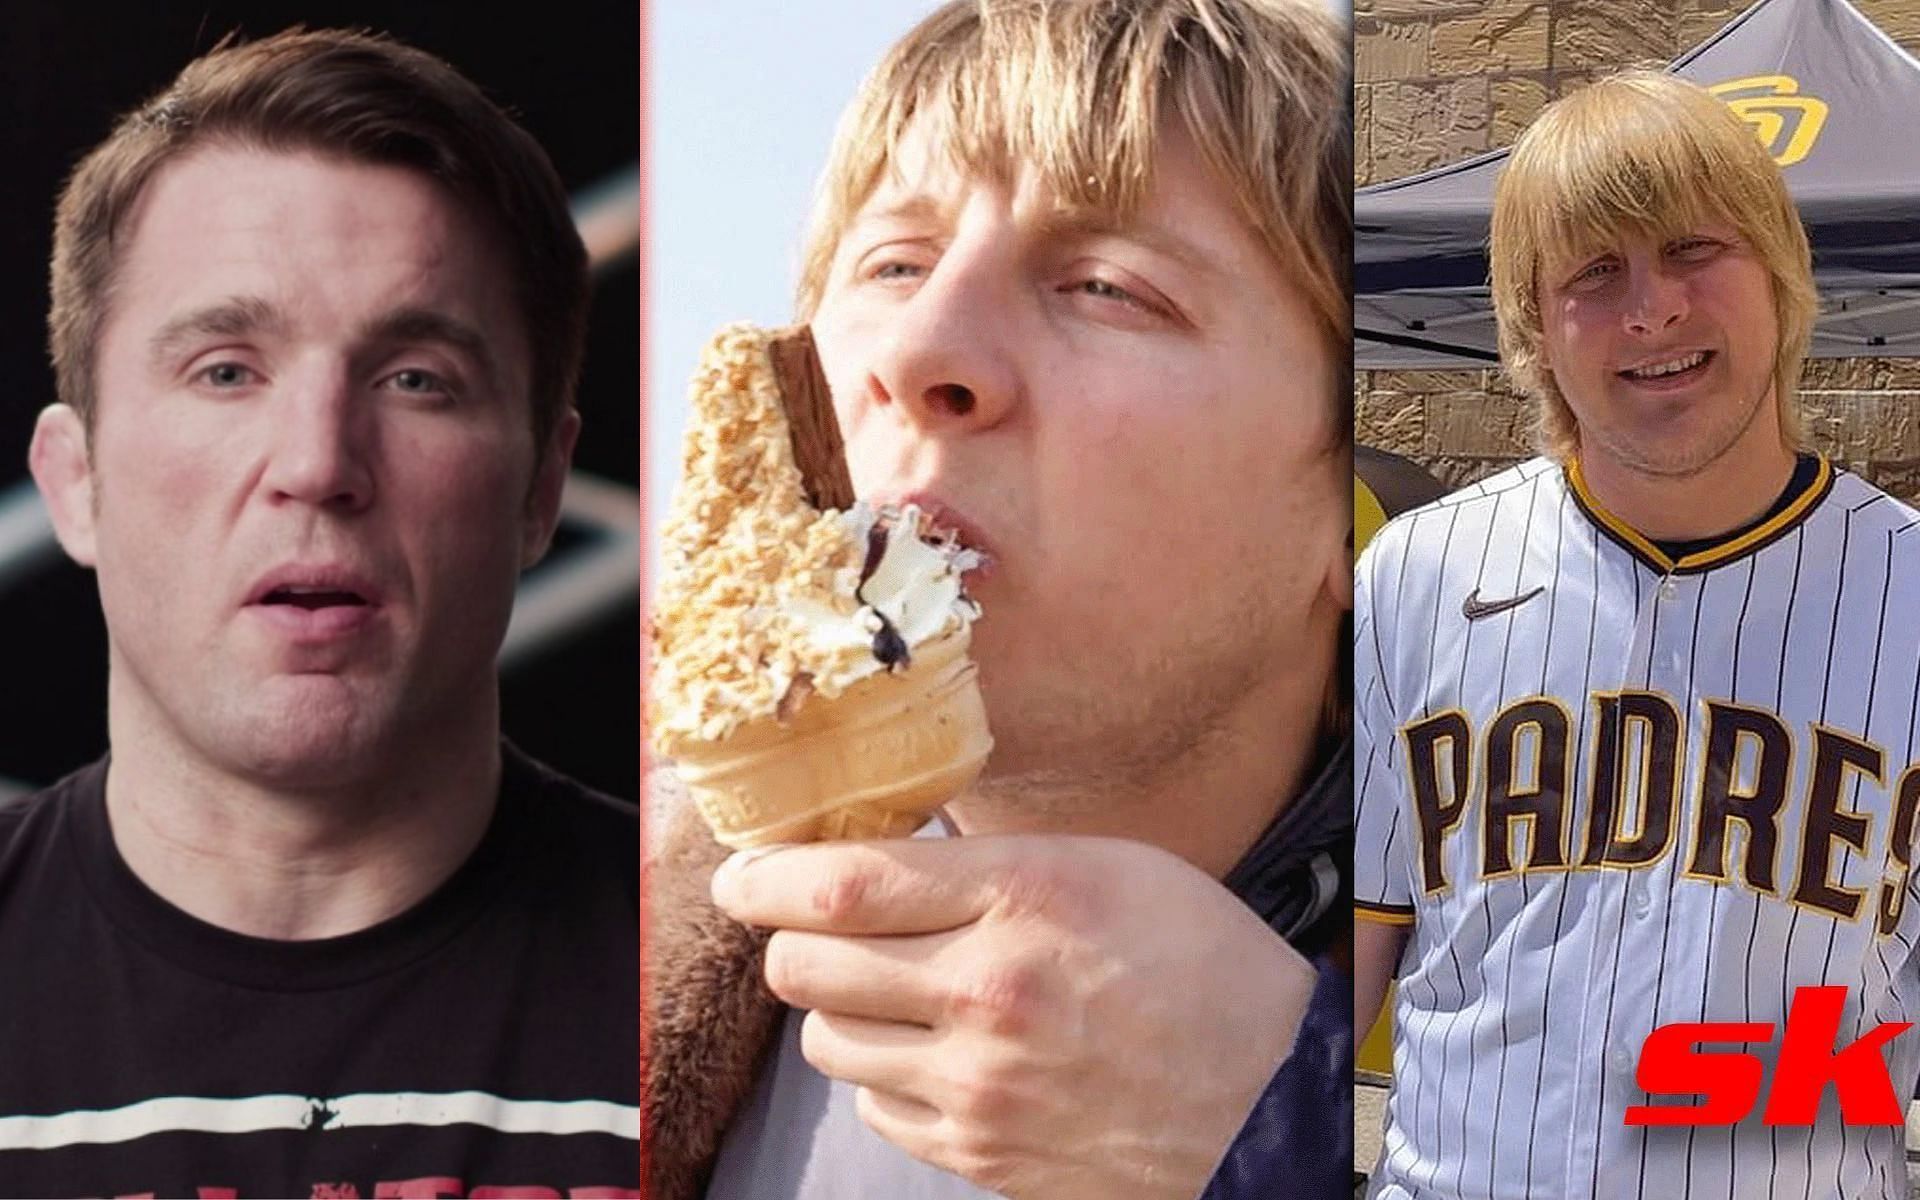 Chael Sonnen (left) and Paddy Pimblett (right) [Photo credit: YouTube.com and @theufcbaddy on Instagram]